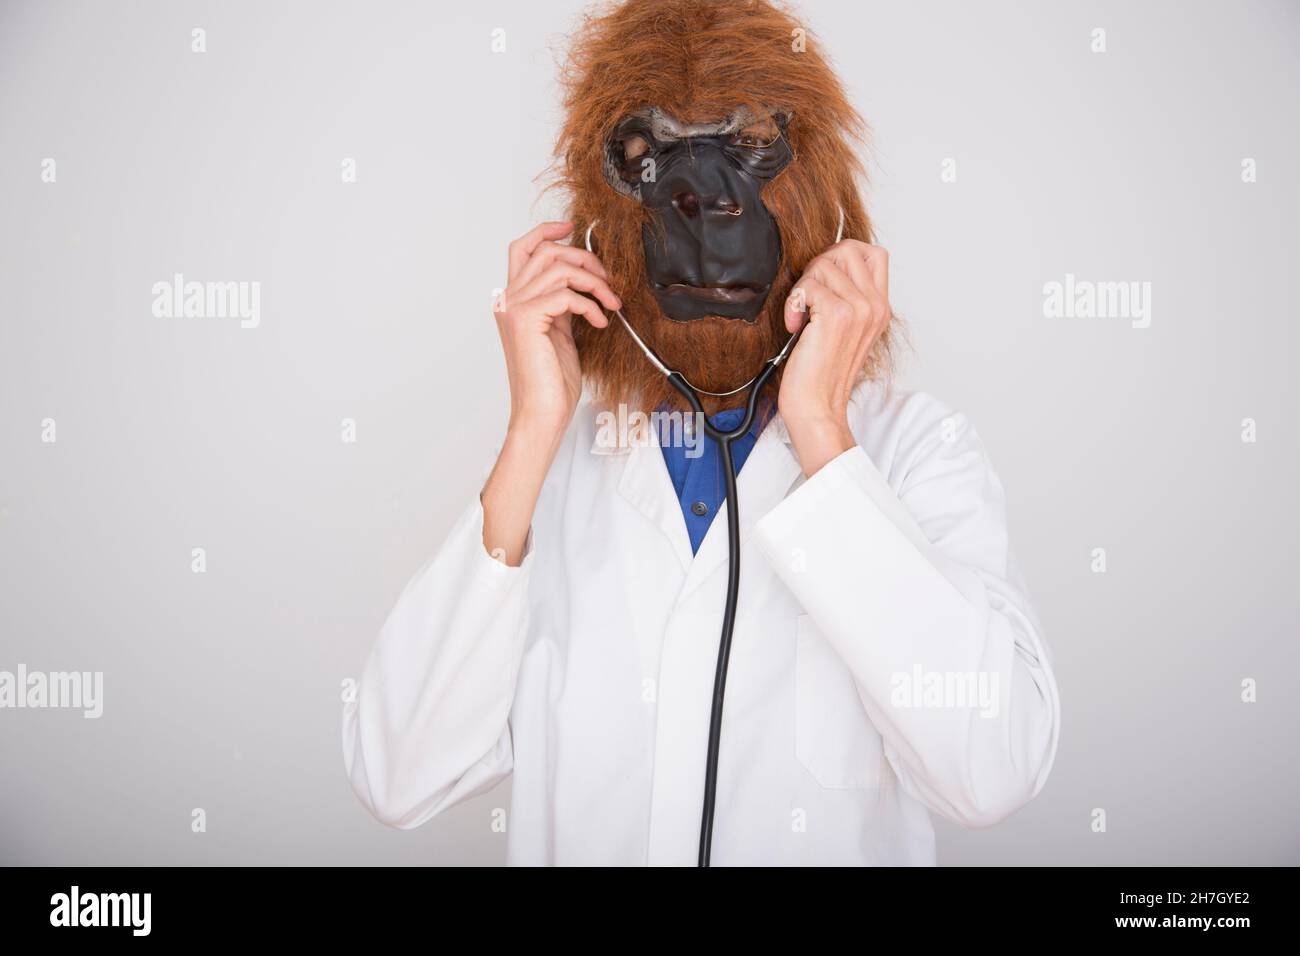 man in gorilla mask with doctor's coat wearing stethoscope on white background Stock Photo